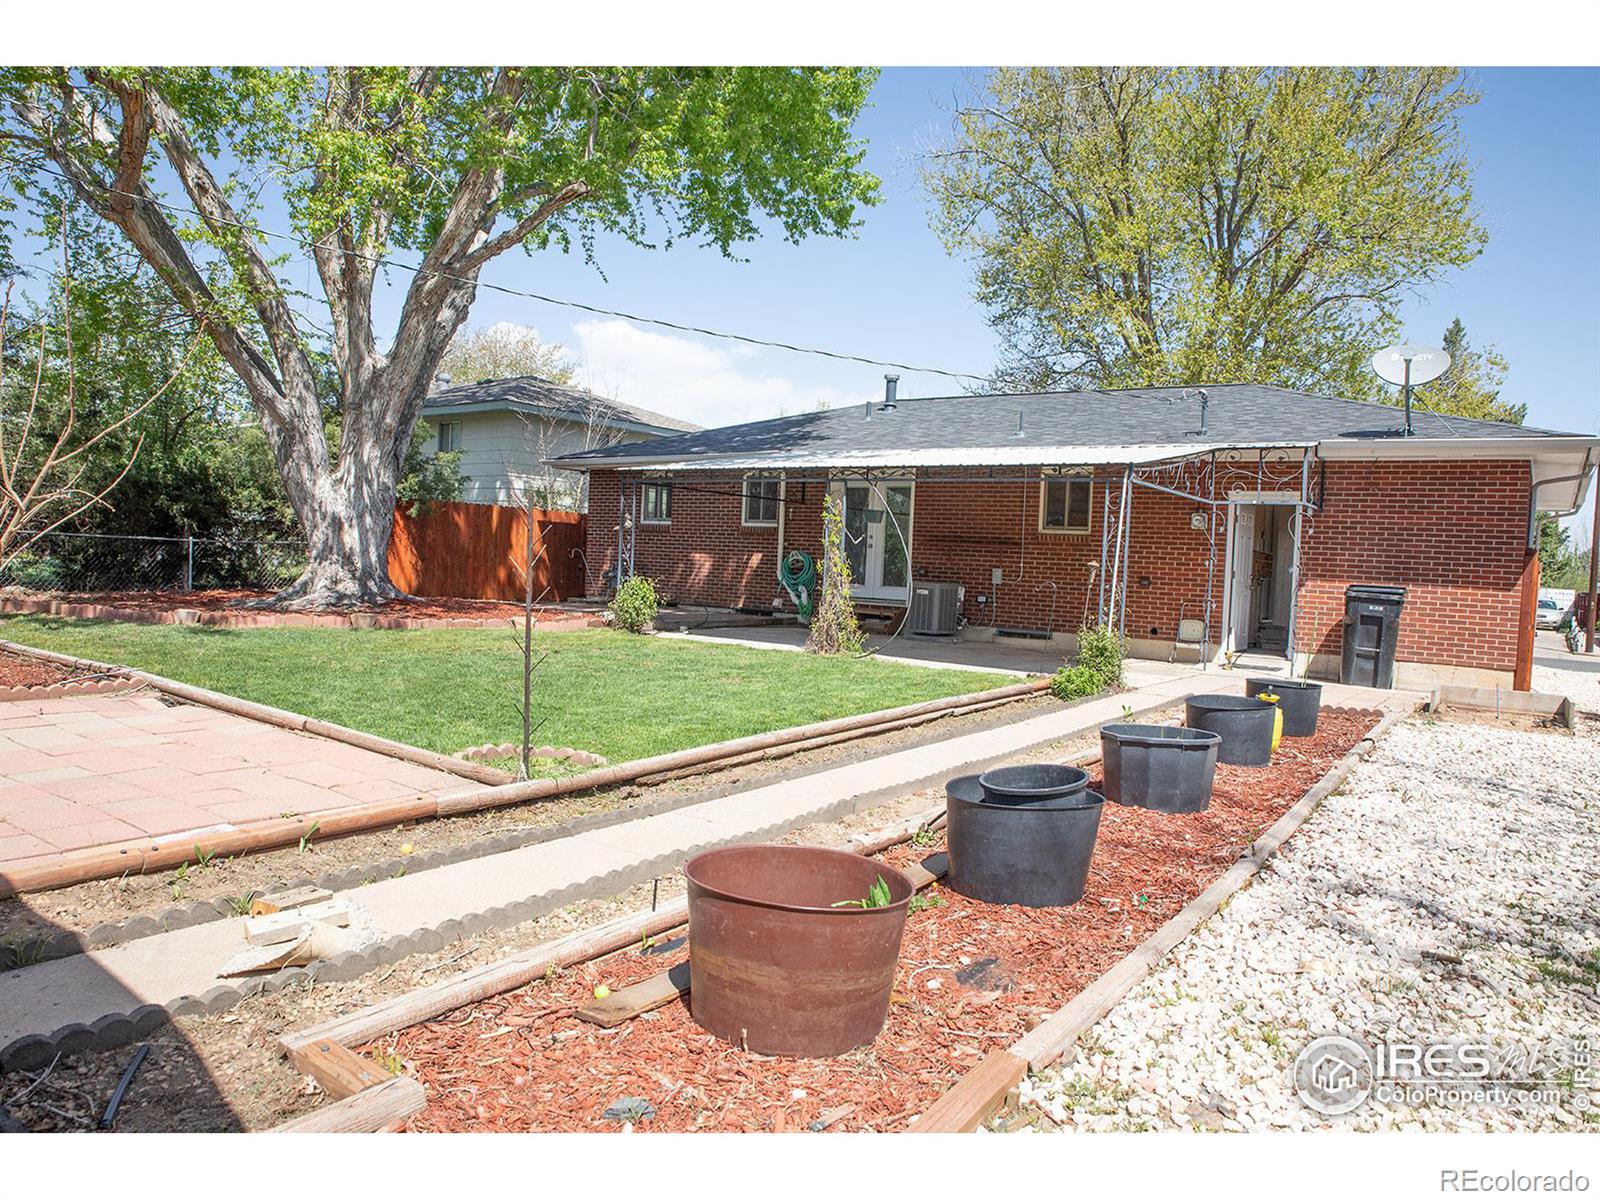 Report Image for 2728 W 14th Street,Greeley, Colorado